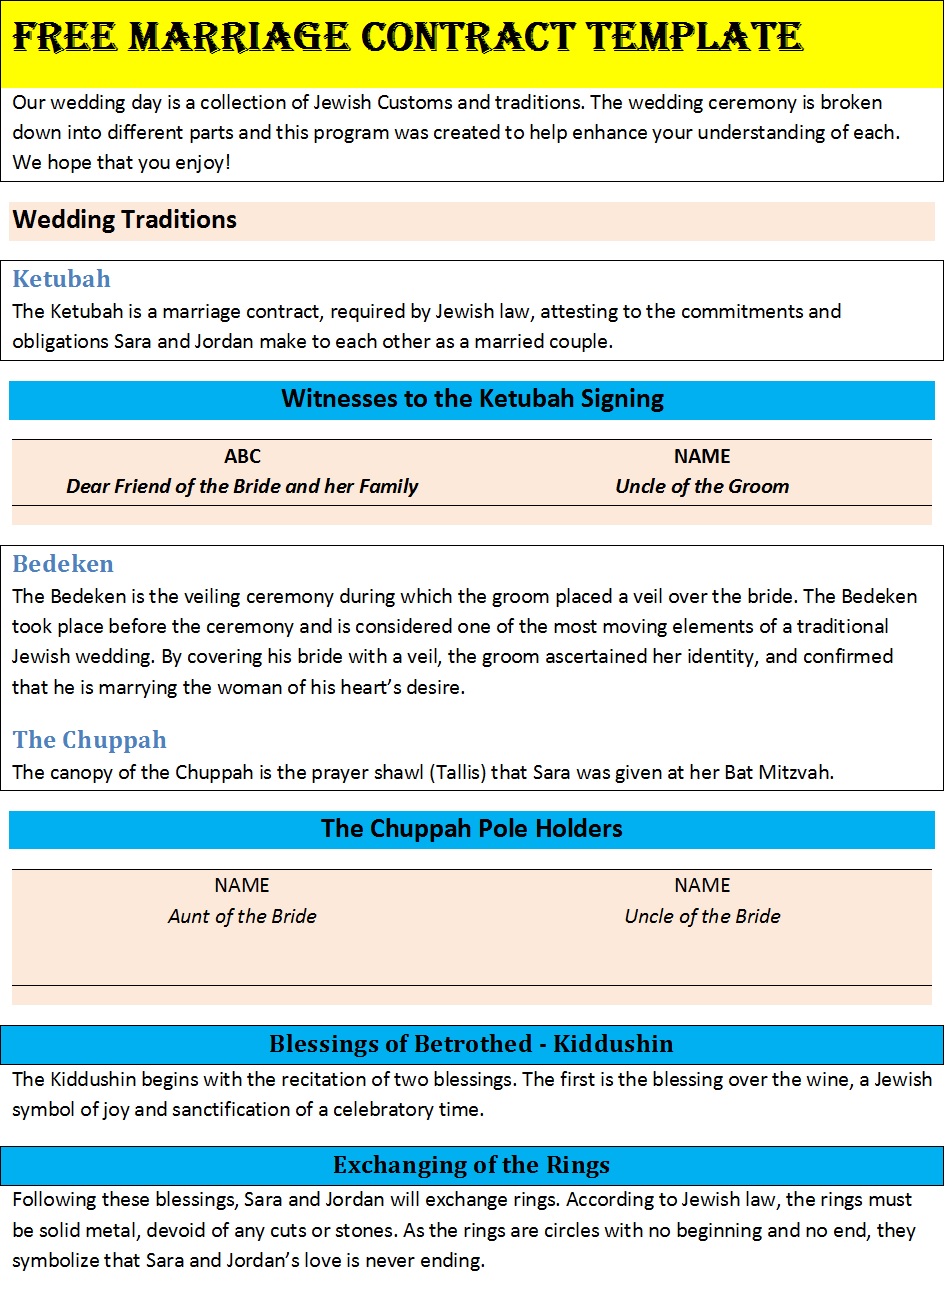 Best 10 Marriage Contract Template